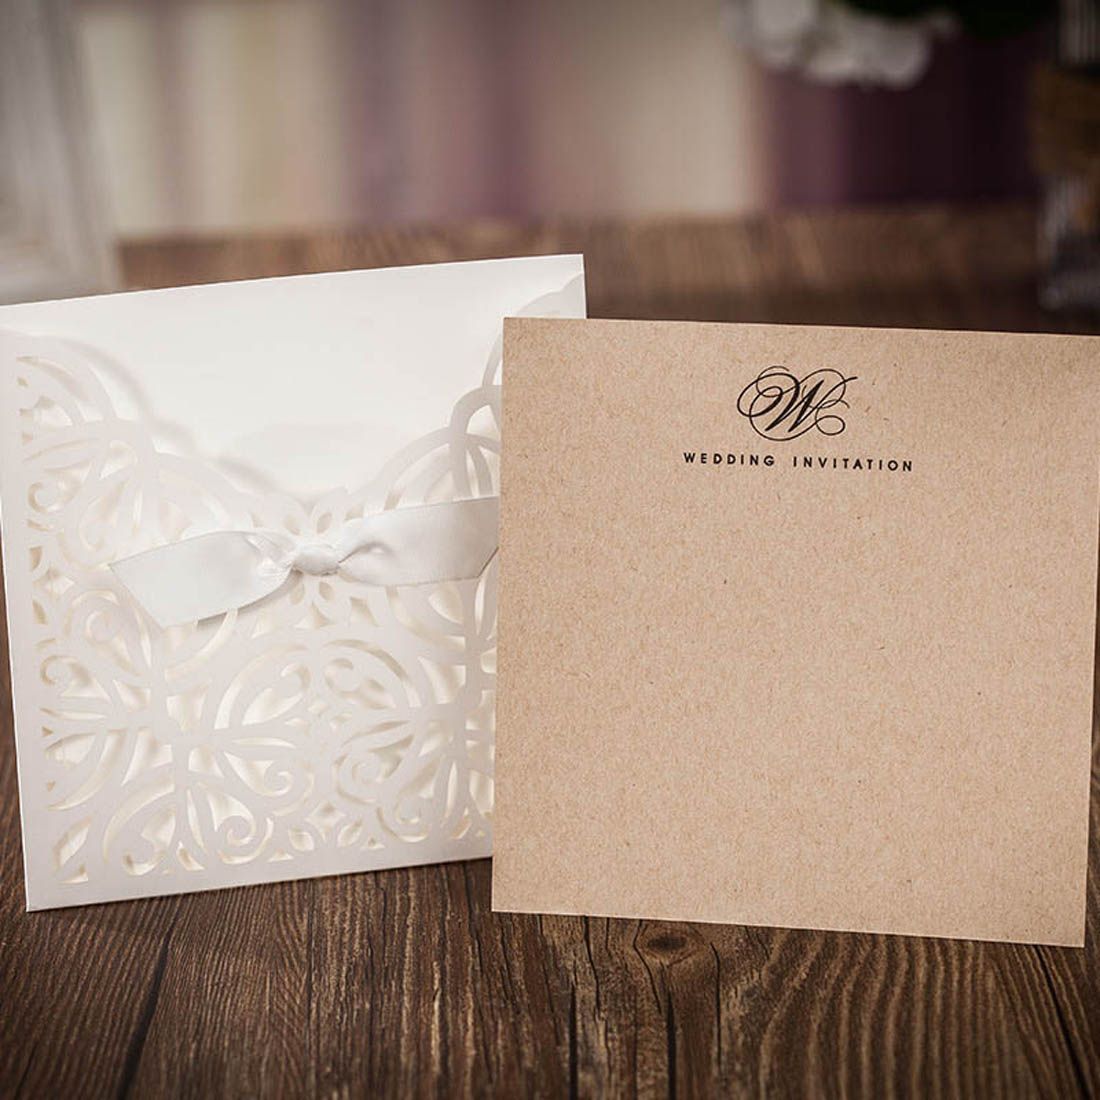 WISHMADE Laser Cut Wedding Invitations Kit with Bow Personalized Invites Cards 